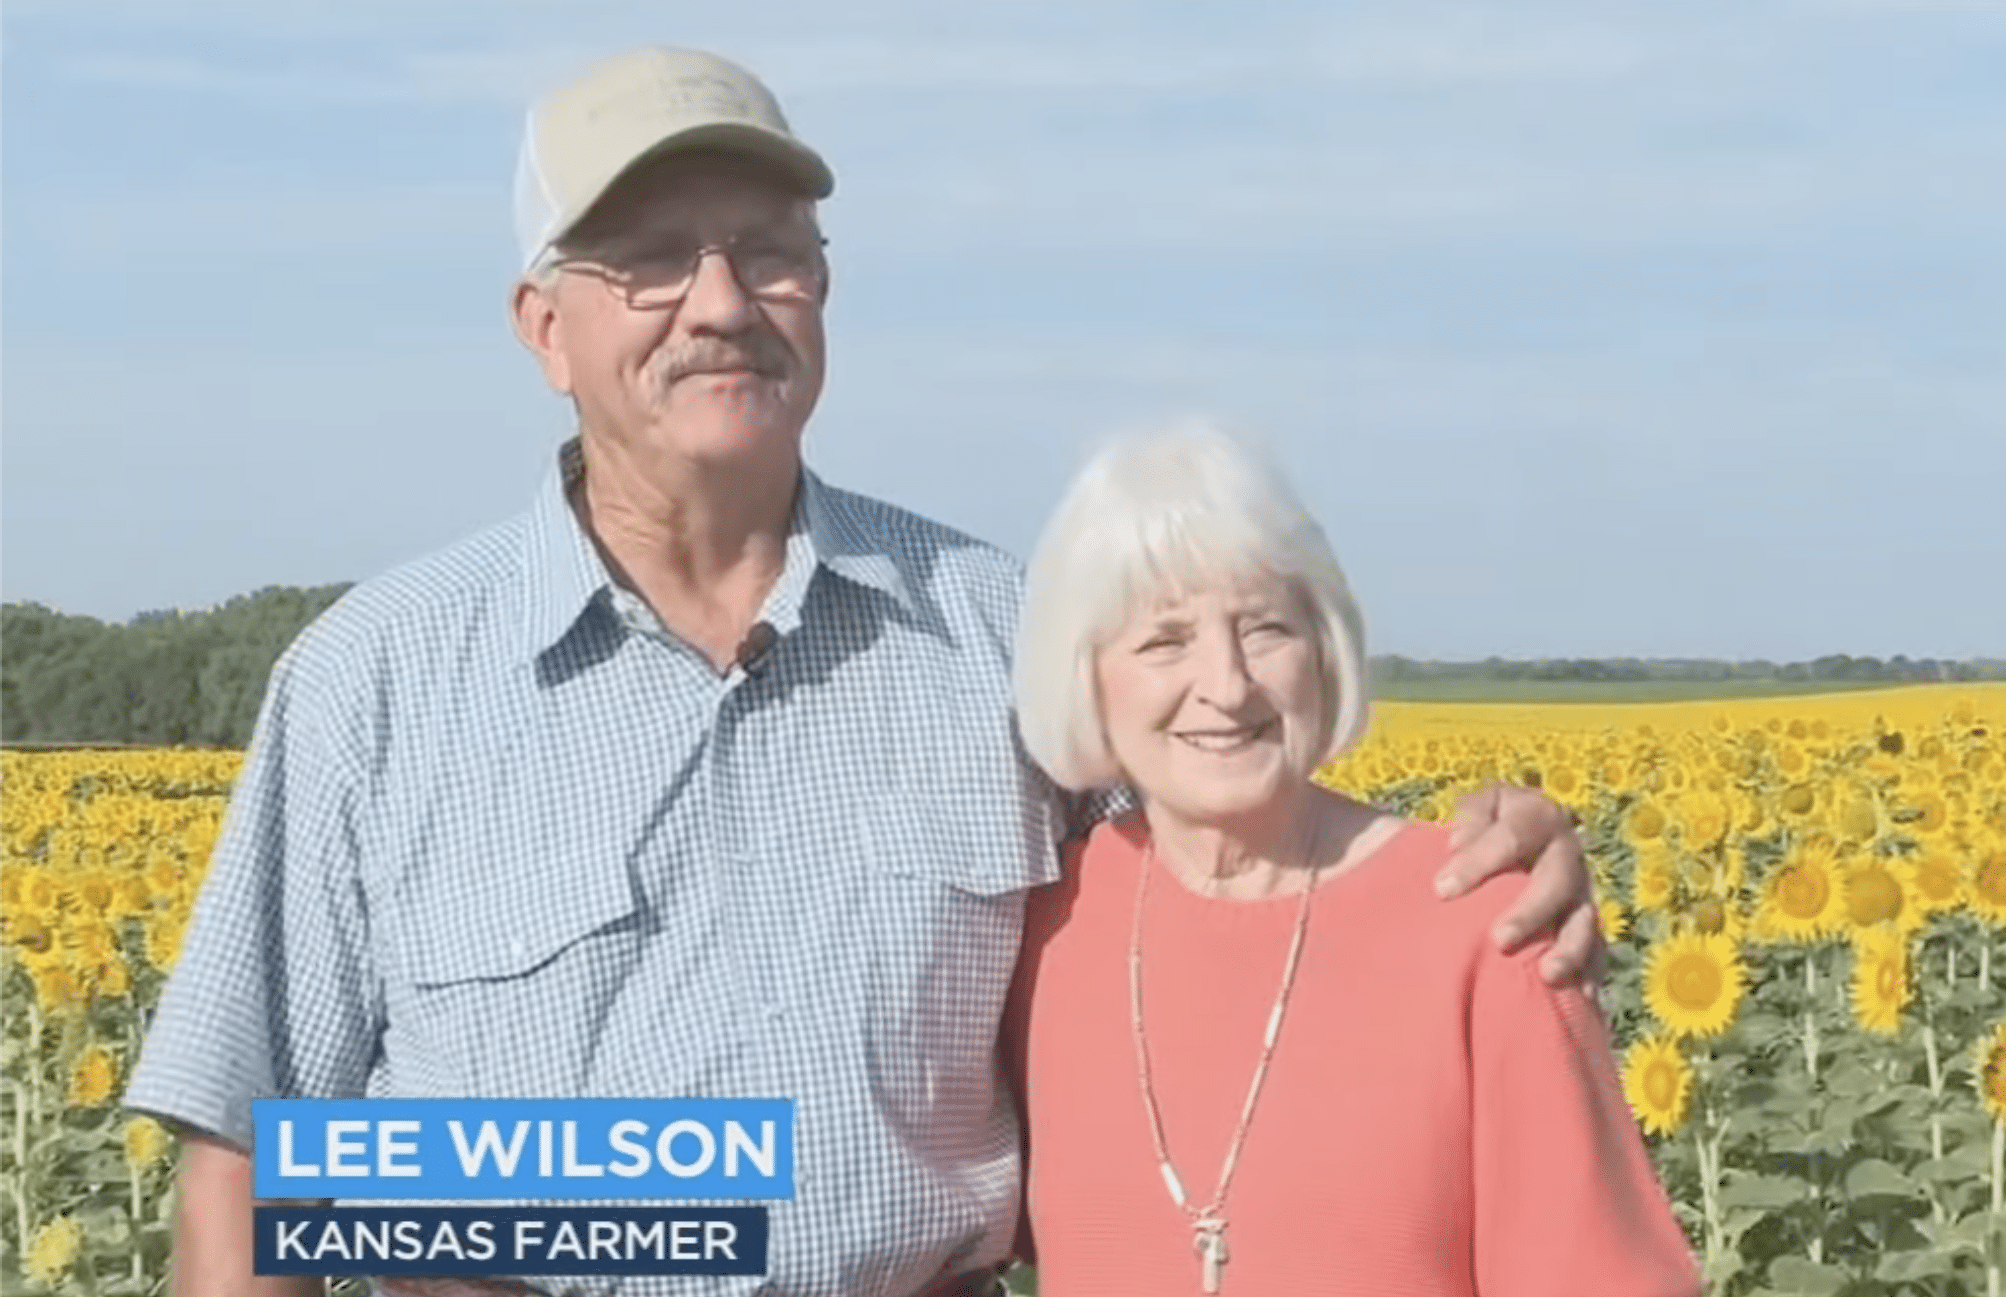 Husband Plants 1 Million Sunflowers for Wife